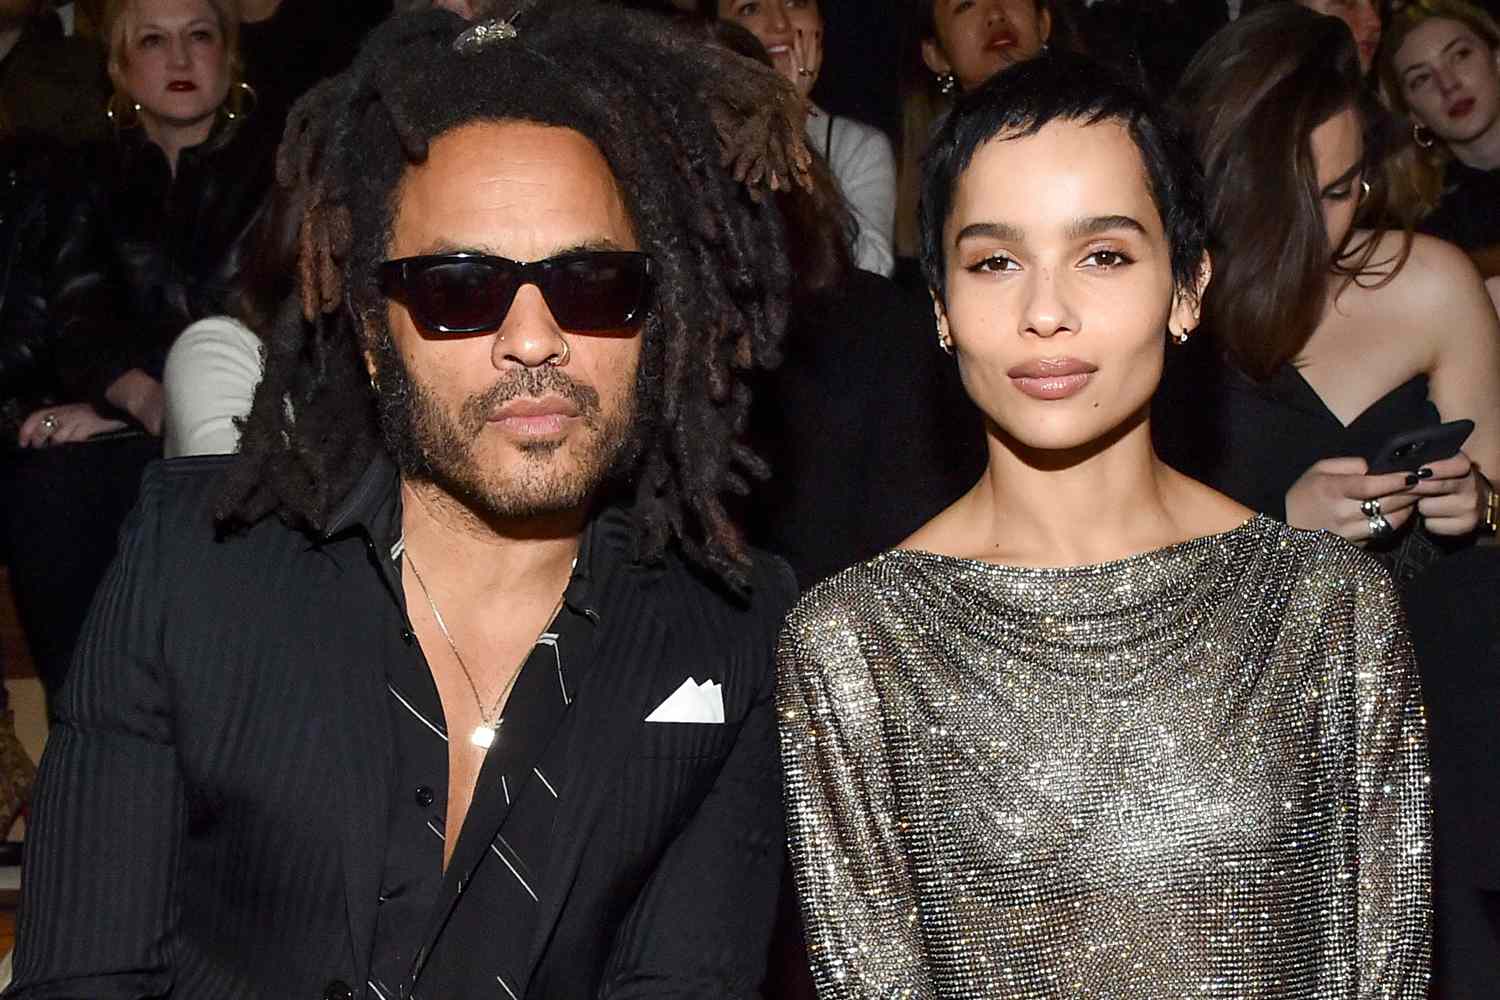 Lenny Kravitz and Zoe Kravitz attends the Saint Laurent show as part of the Paris Fashion Week Womenswear Fall/Winter 2020/2021 on February 25, 2020